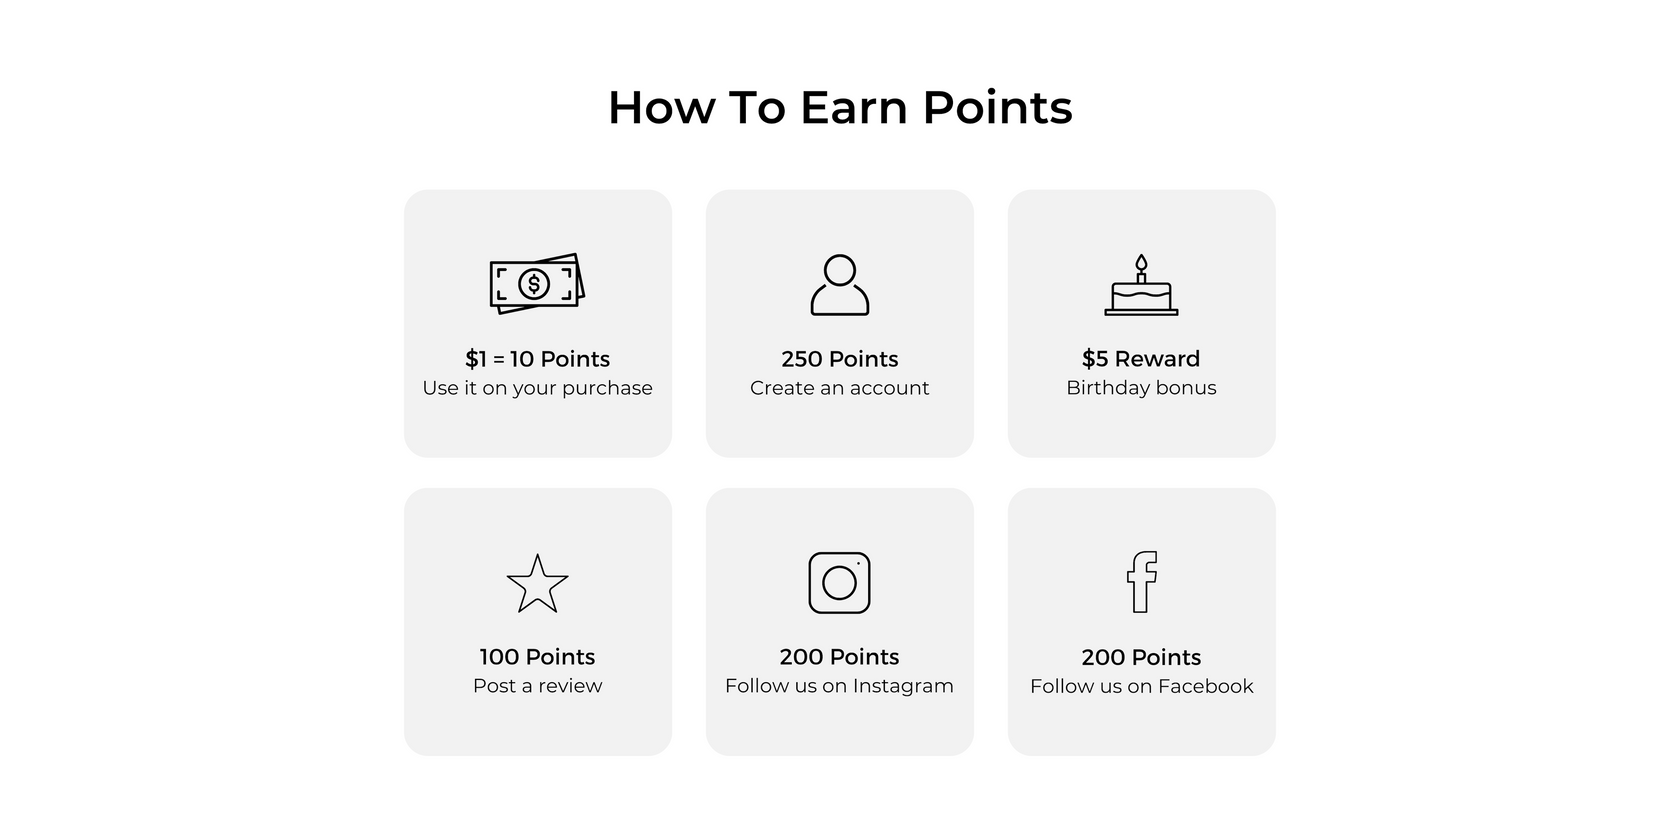 how to earn points. spend $1 to get 10 points. create an account, 250 points. birthday, 5 dollar reward. post a review, 100 points. follow us on instagram, 200 points. follow us on facebook, 200 points